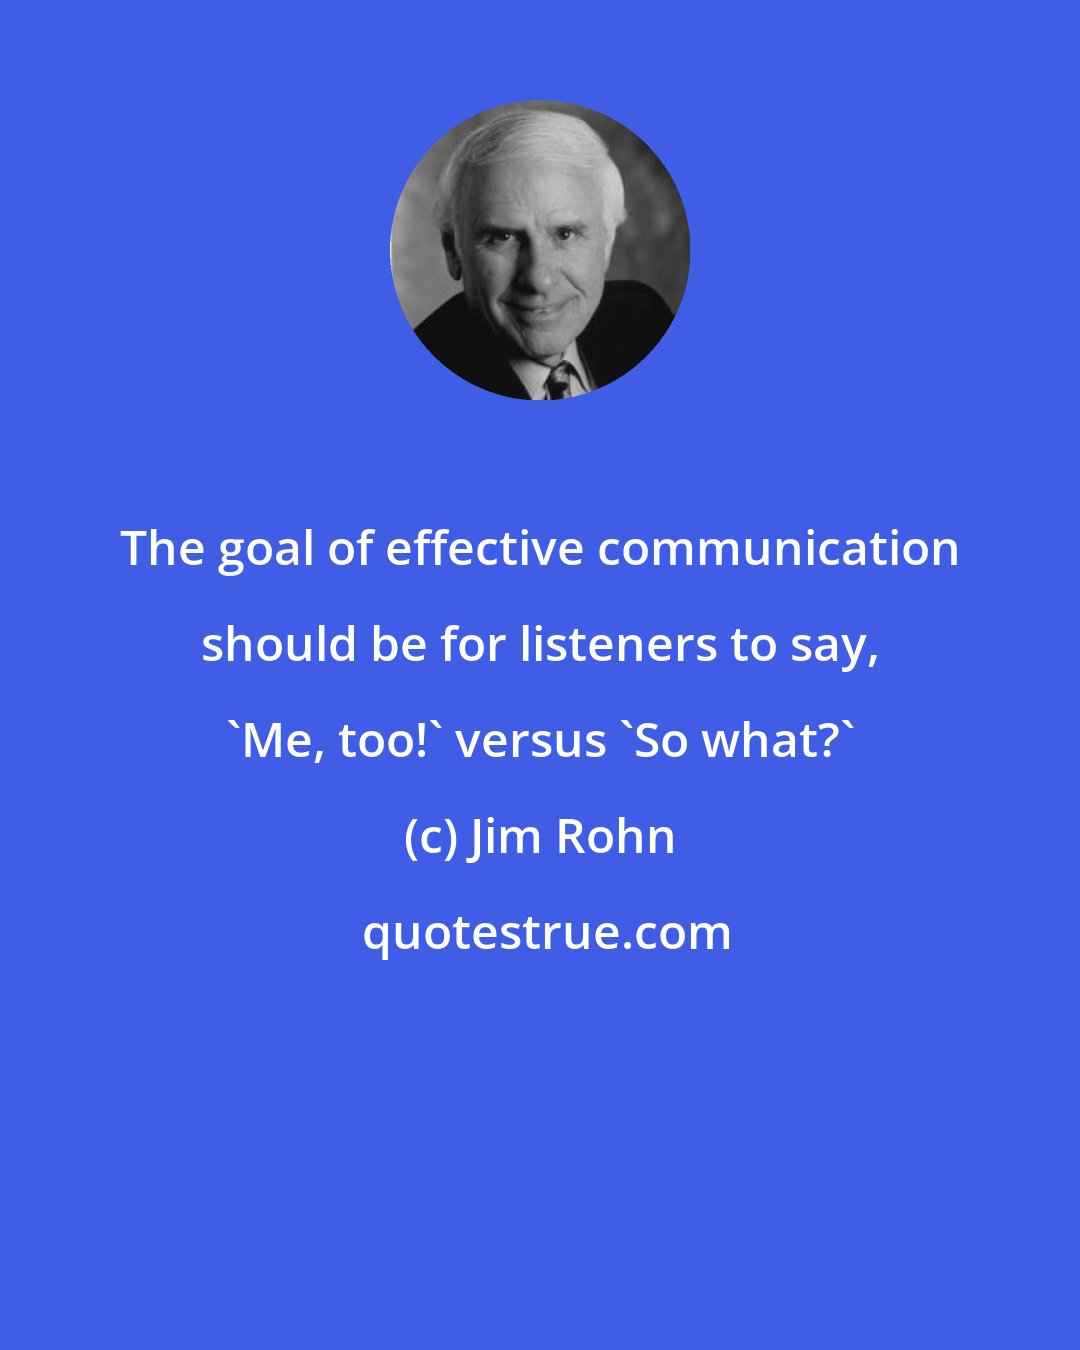 Jim Rohn: The goal of effective communication should be for listeners to say, 'Me, too!' versus 'So what?'